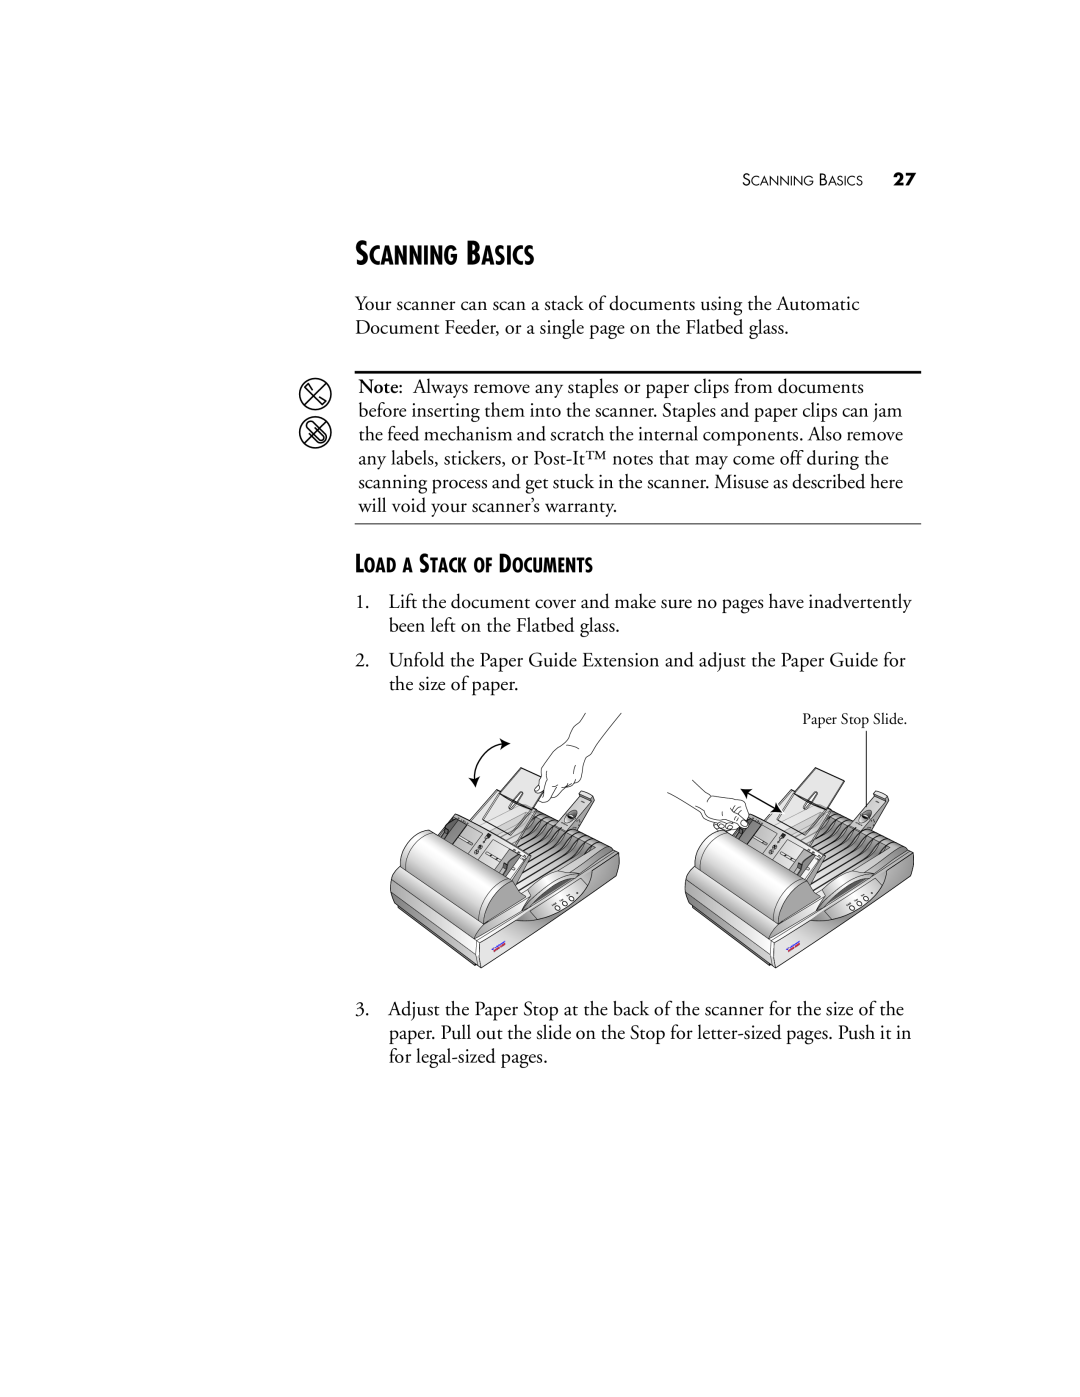 Visioneer 9750 manual Scanning Basics, Load A Stack Of Documents 